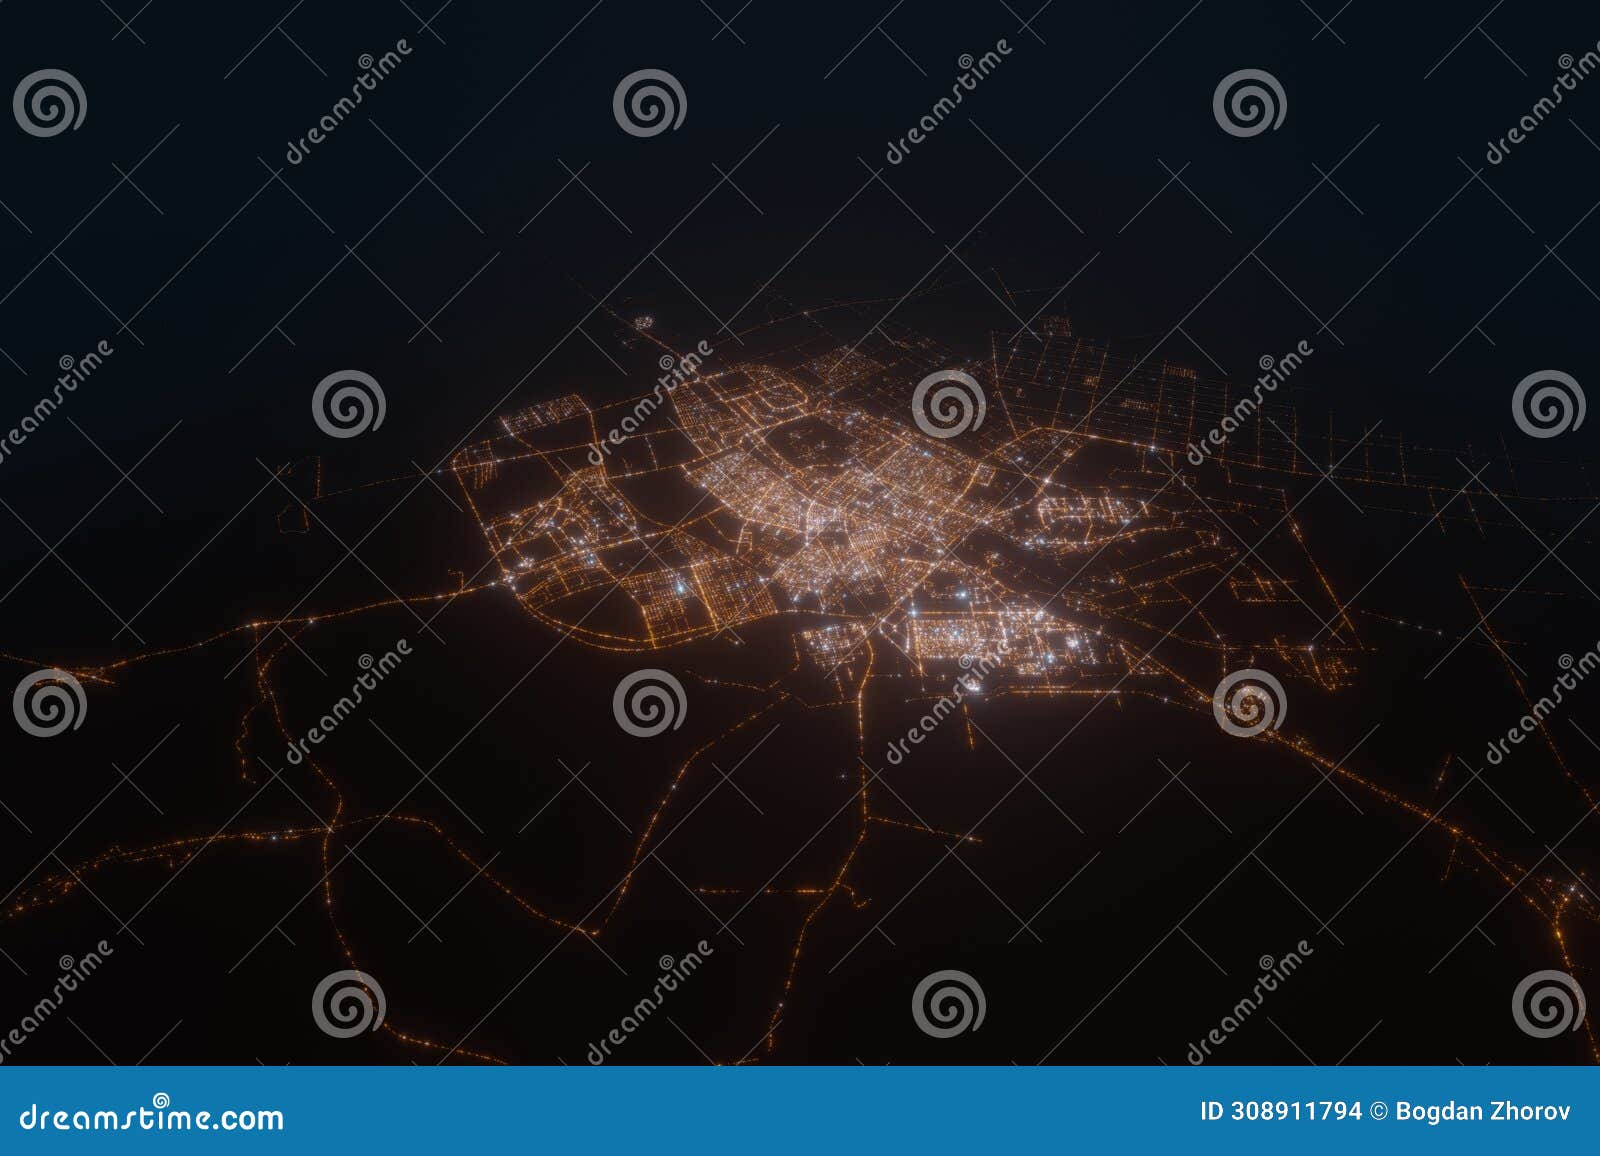 aerial view on tabuk (saudi arabia) from south. top view on modern city at night from space